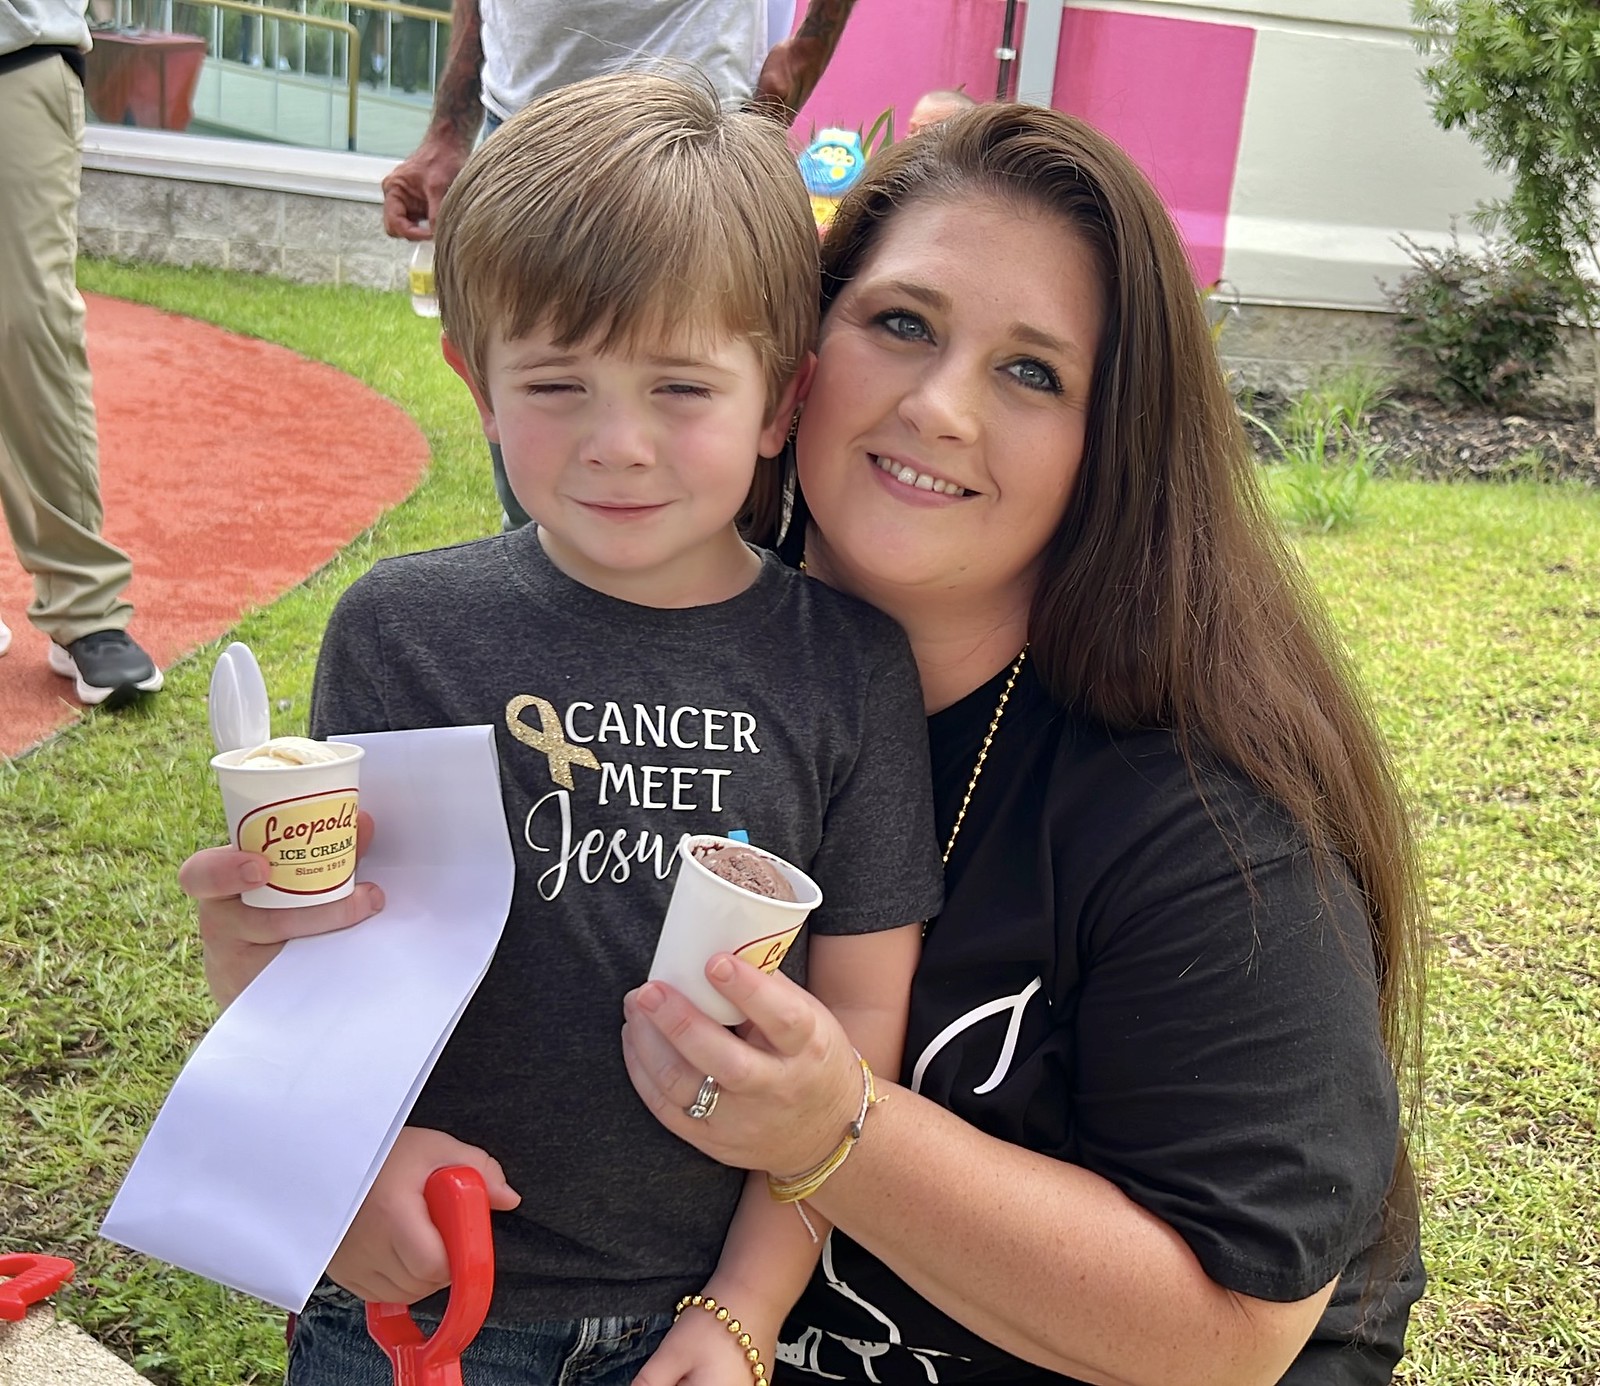 CURE Childhood Cancer Ice Cream Social at Memorial Children’s Hospital